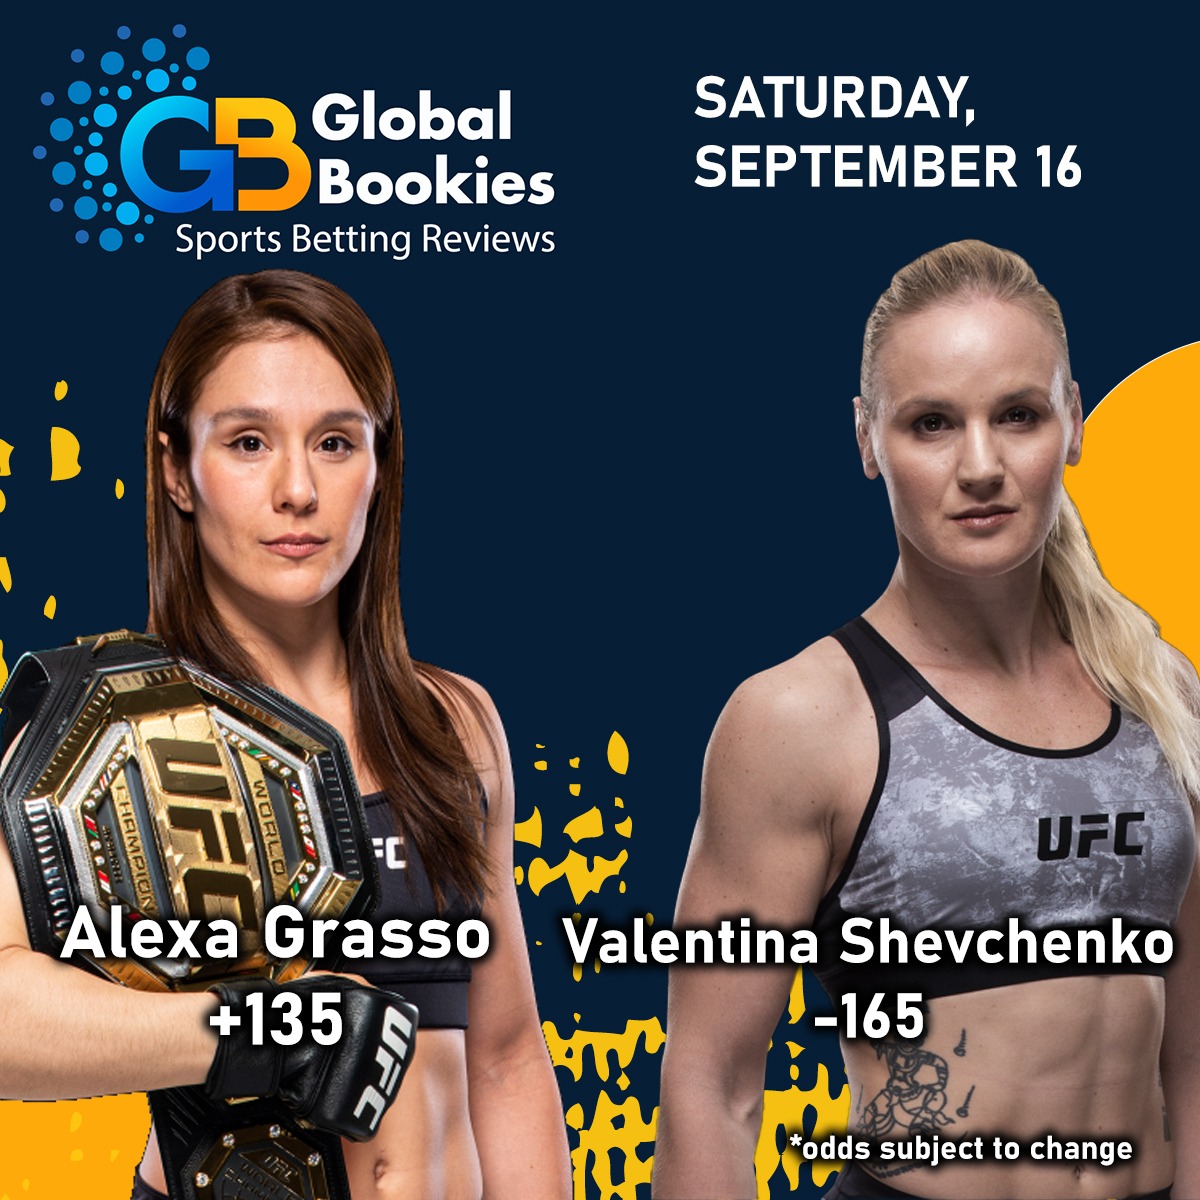 Don't miss this opportunity to see #AlexaGrasso take on #Valentinashevchenko! These two fighters are sure to put on a great show, so make sure you place your bets at the right place.  Sign up at one of our featured sportsbooks and let the action begin!

#OctagonBattle #UFCFans